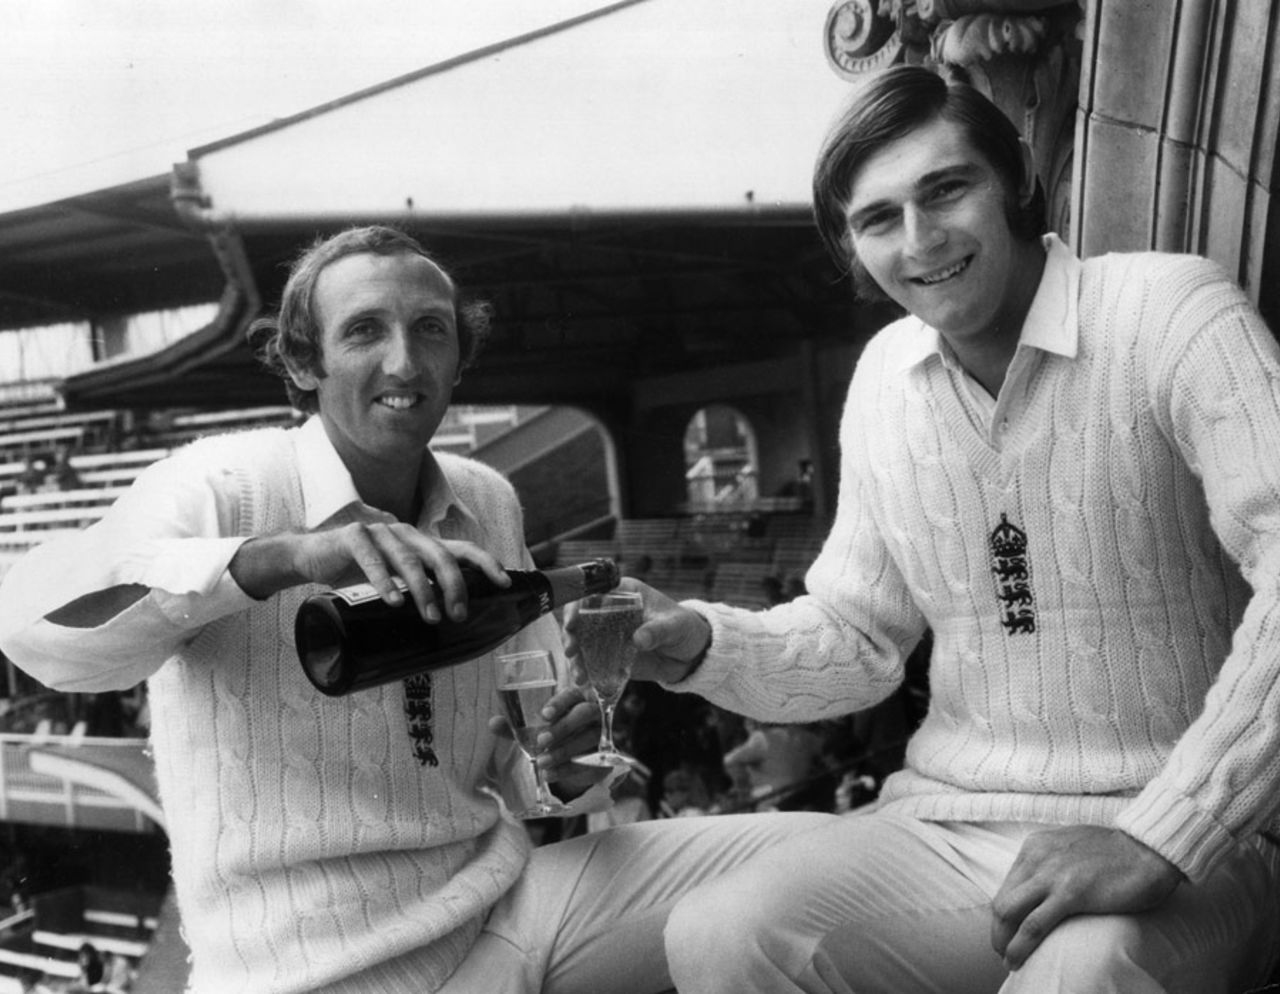 Geoff Arnold and Chris Old celebrate India's rout, England v India, 2nd Test, Lord's, June 24, 1974